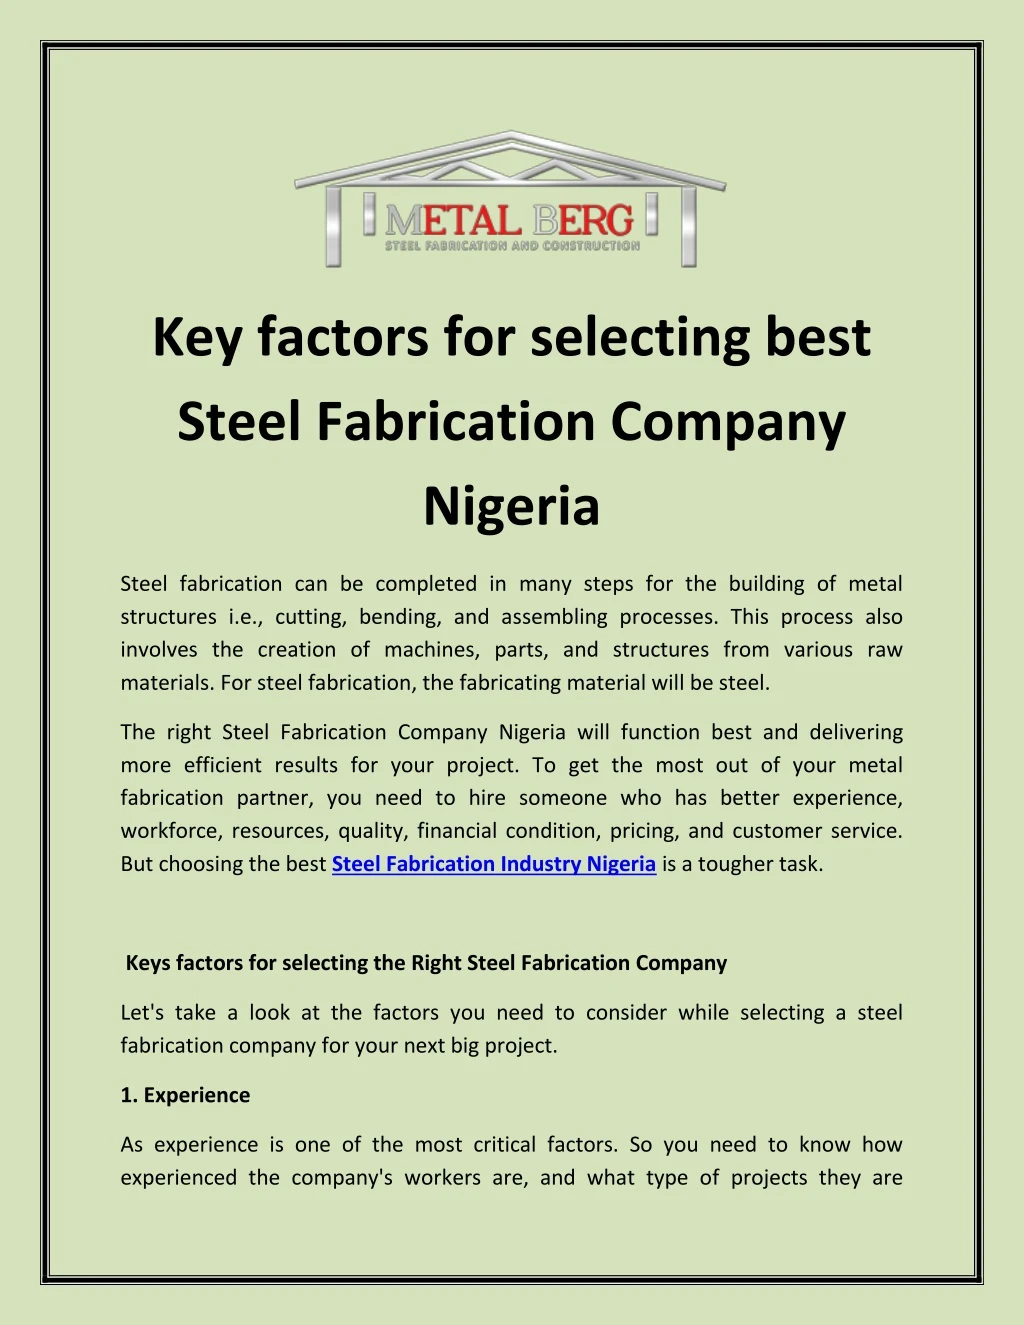 key factors for selecting best steel fabrication